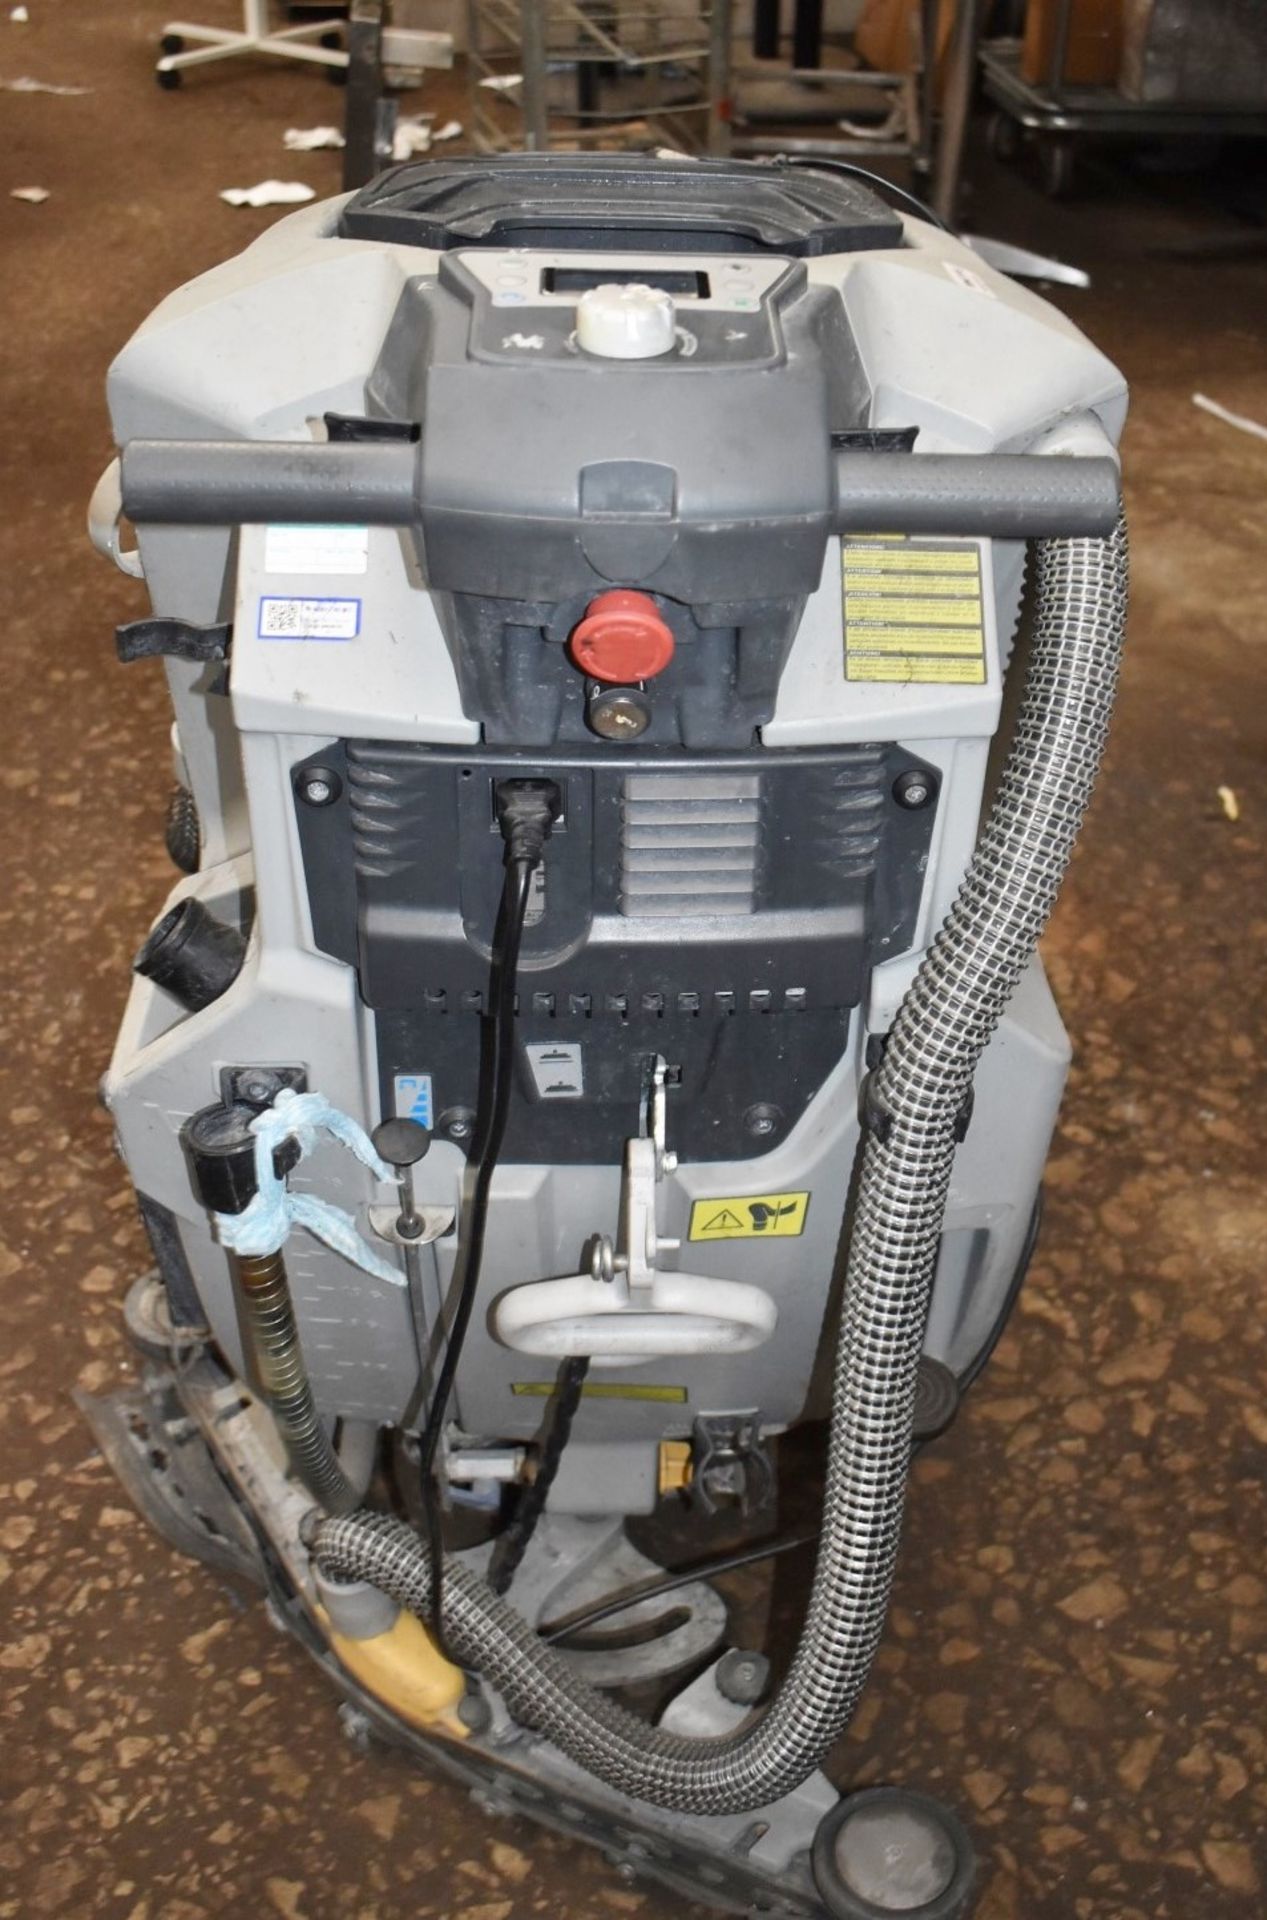 1 x Ice Scrub 65D Commercial Floor Scrubber Dryer - Recently Removed From a Supermarket - Image 9 of 16